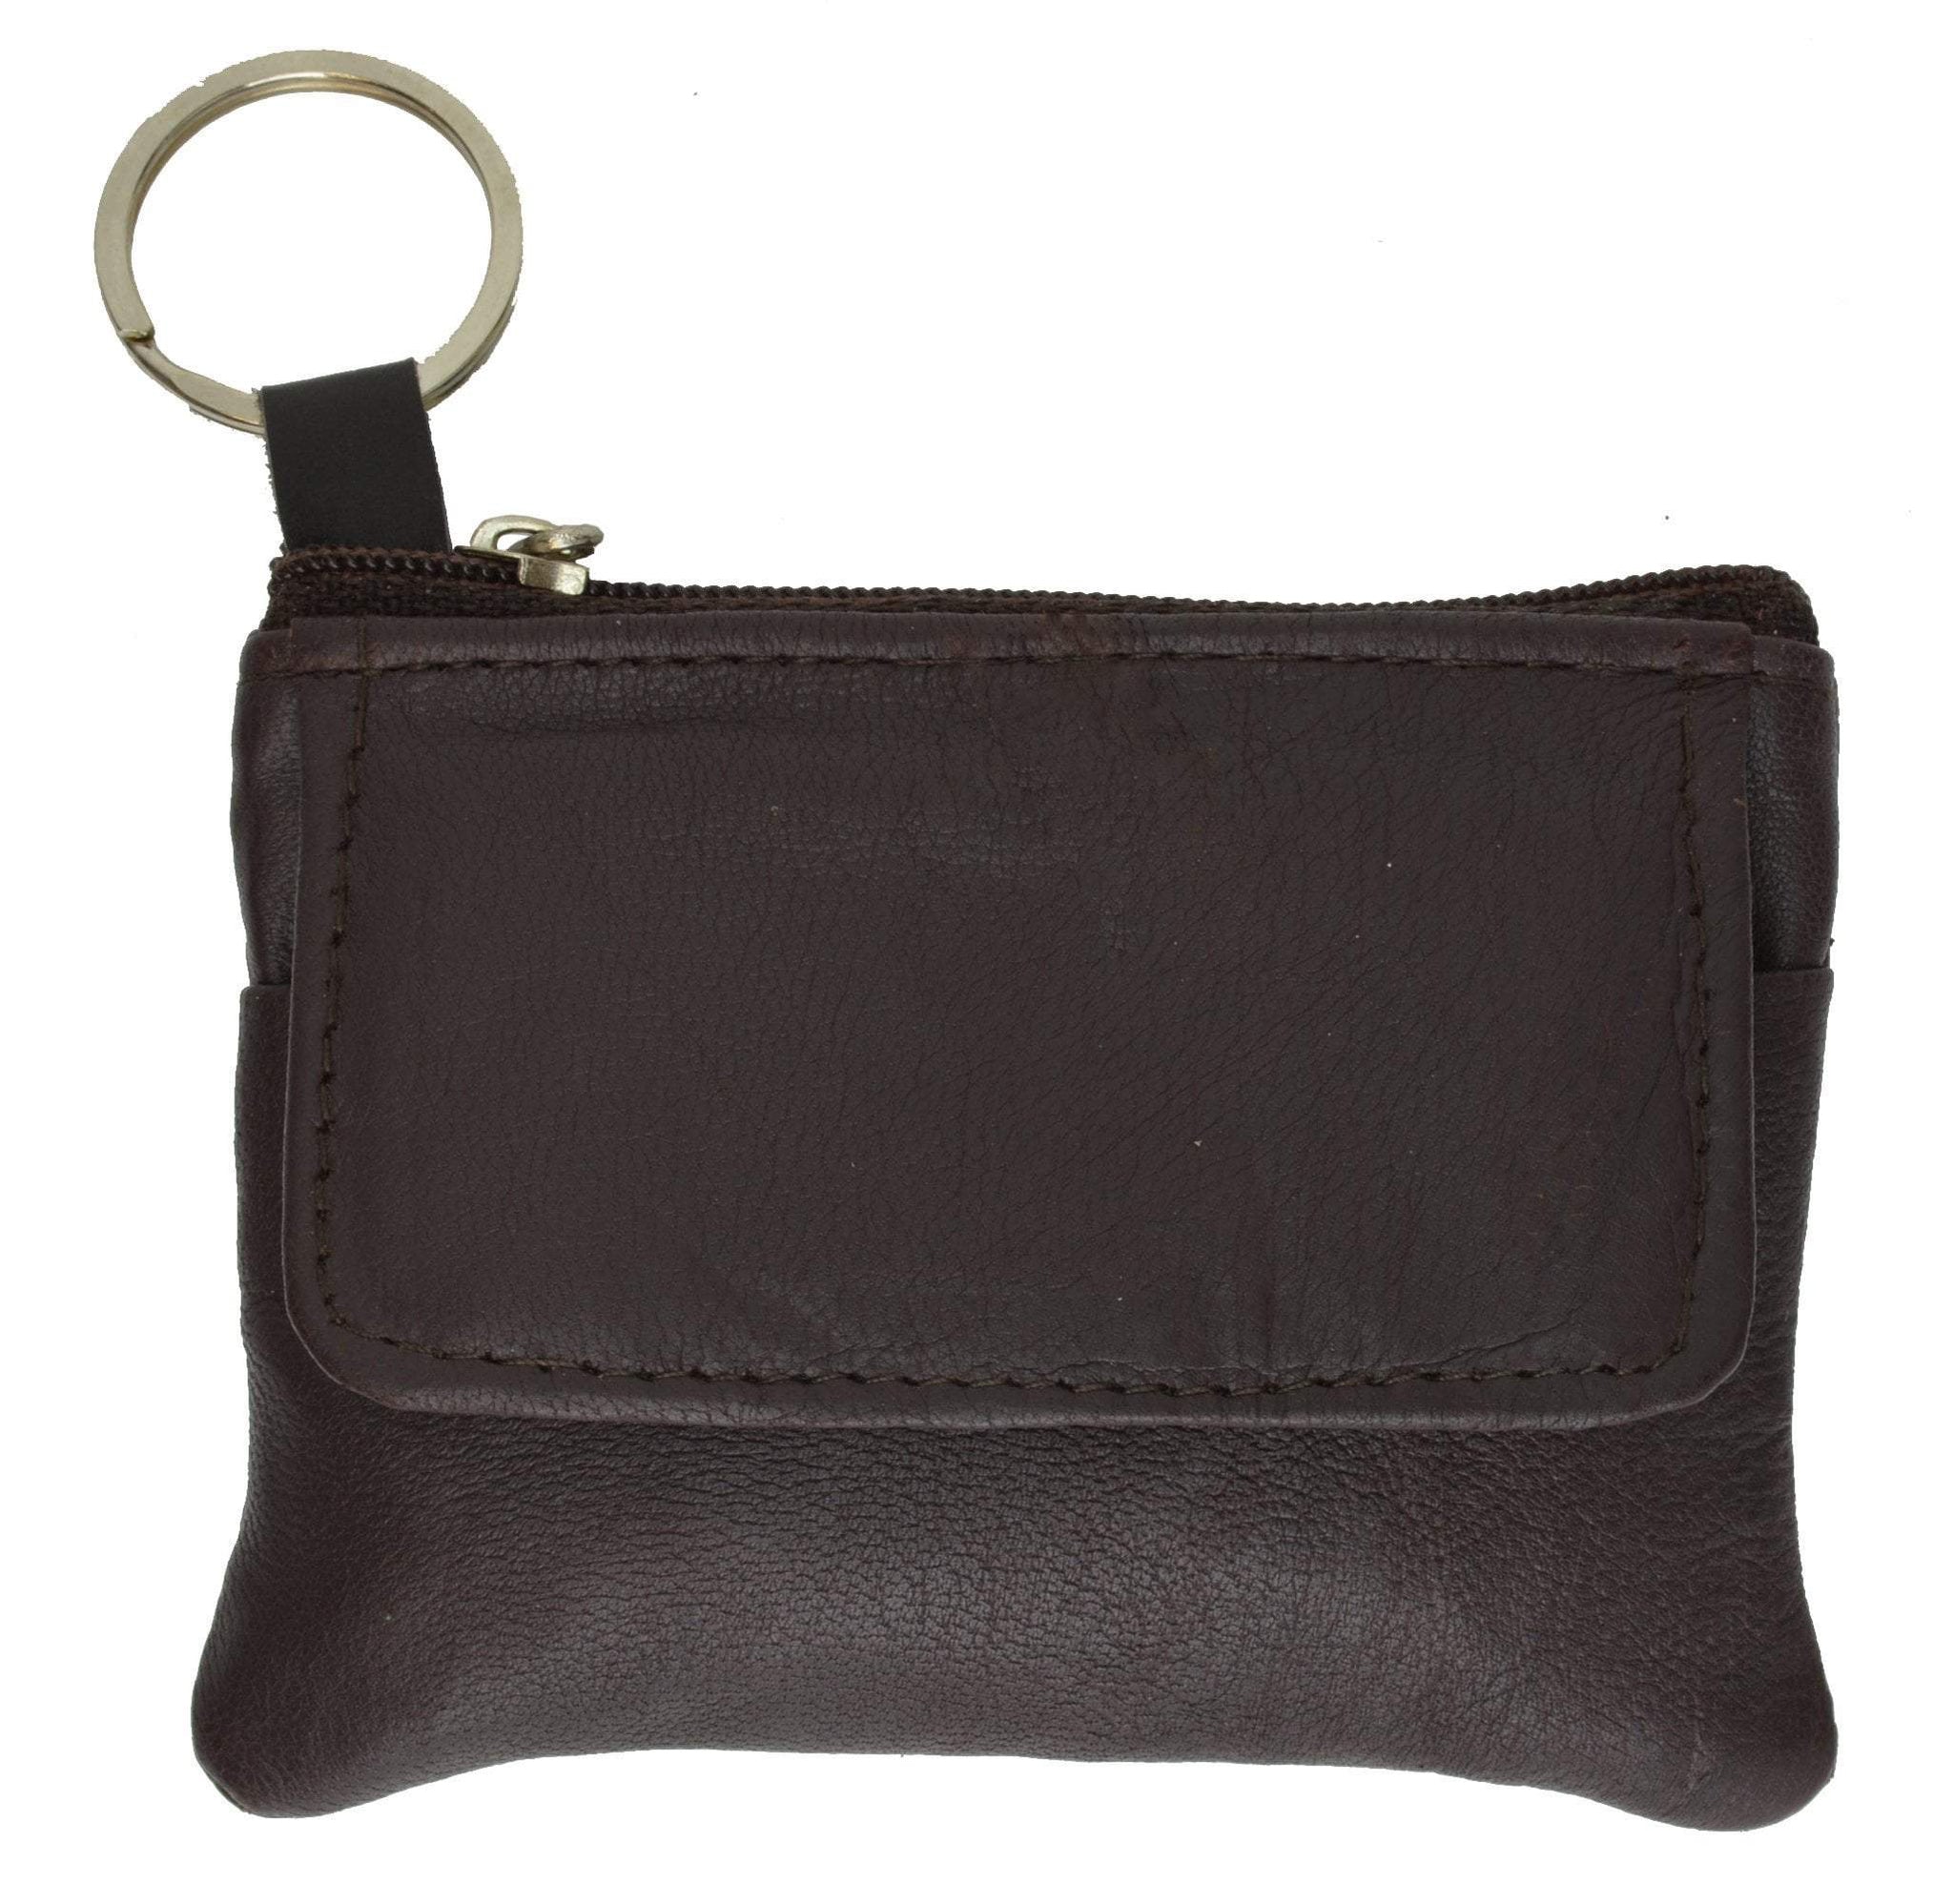 Women's Genuine Leather Coin Purse Mini Pouch Change Wallet with Key Ring, Black